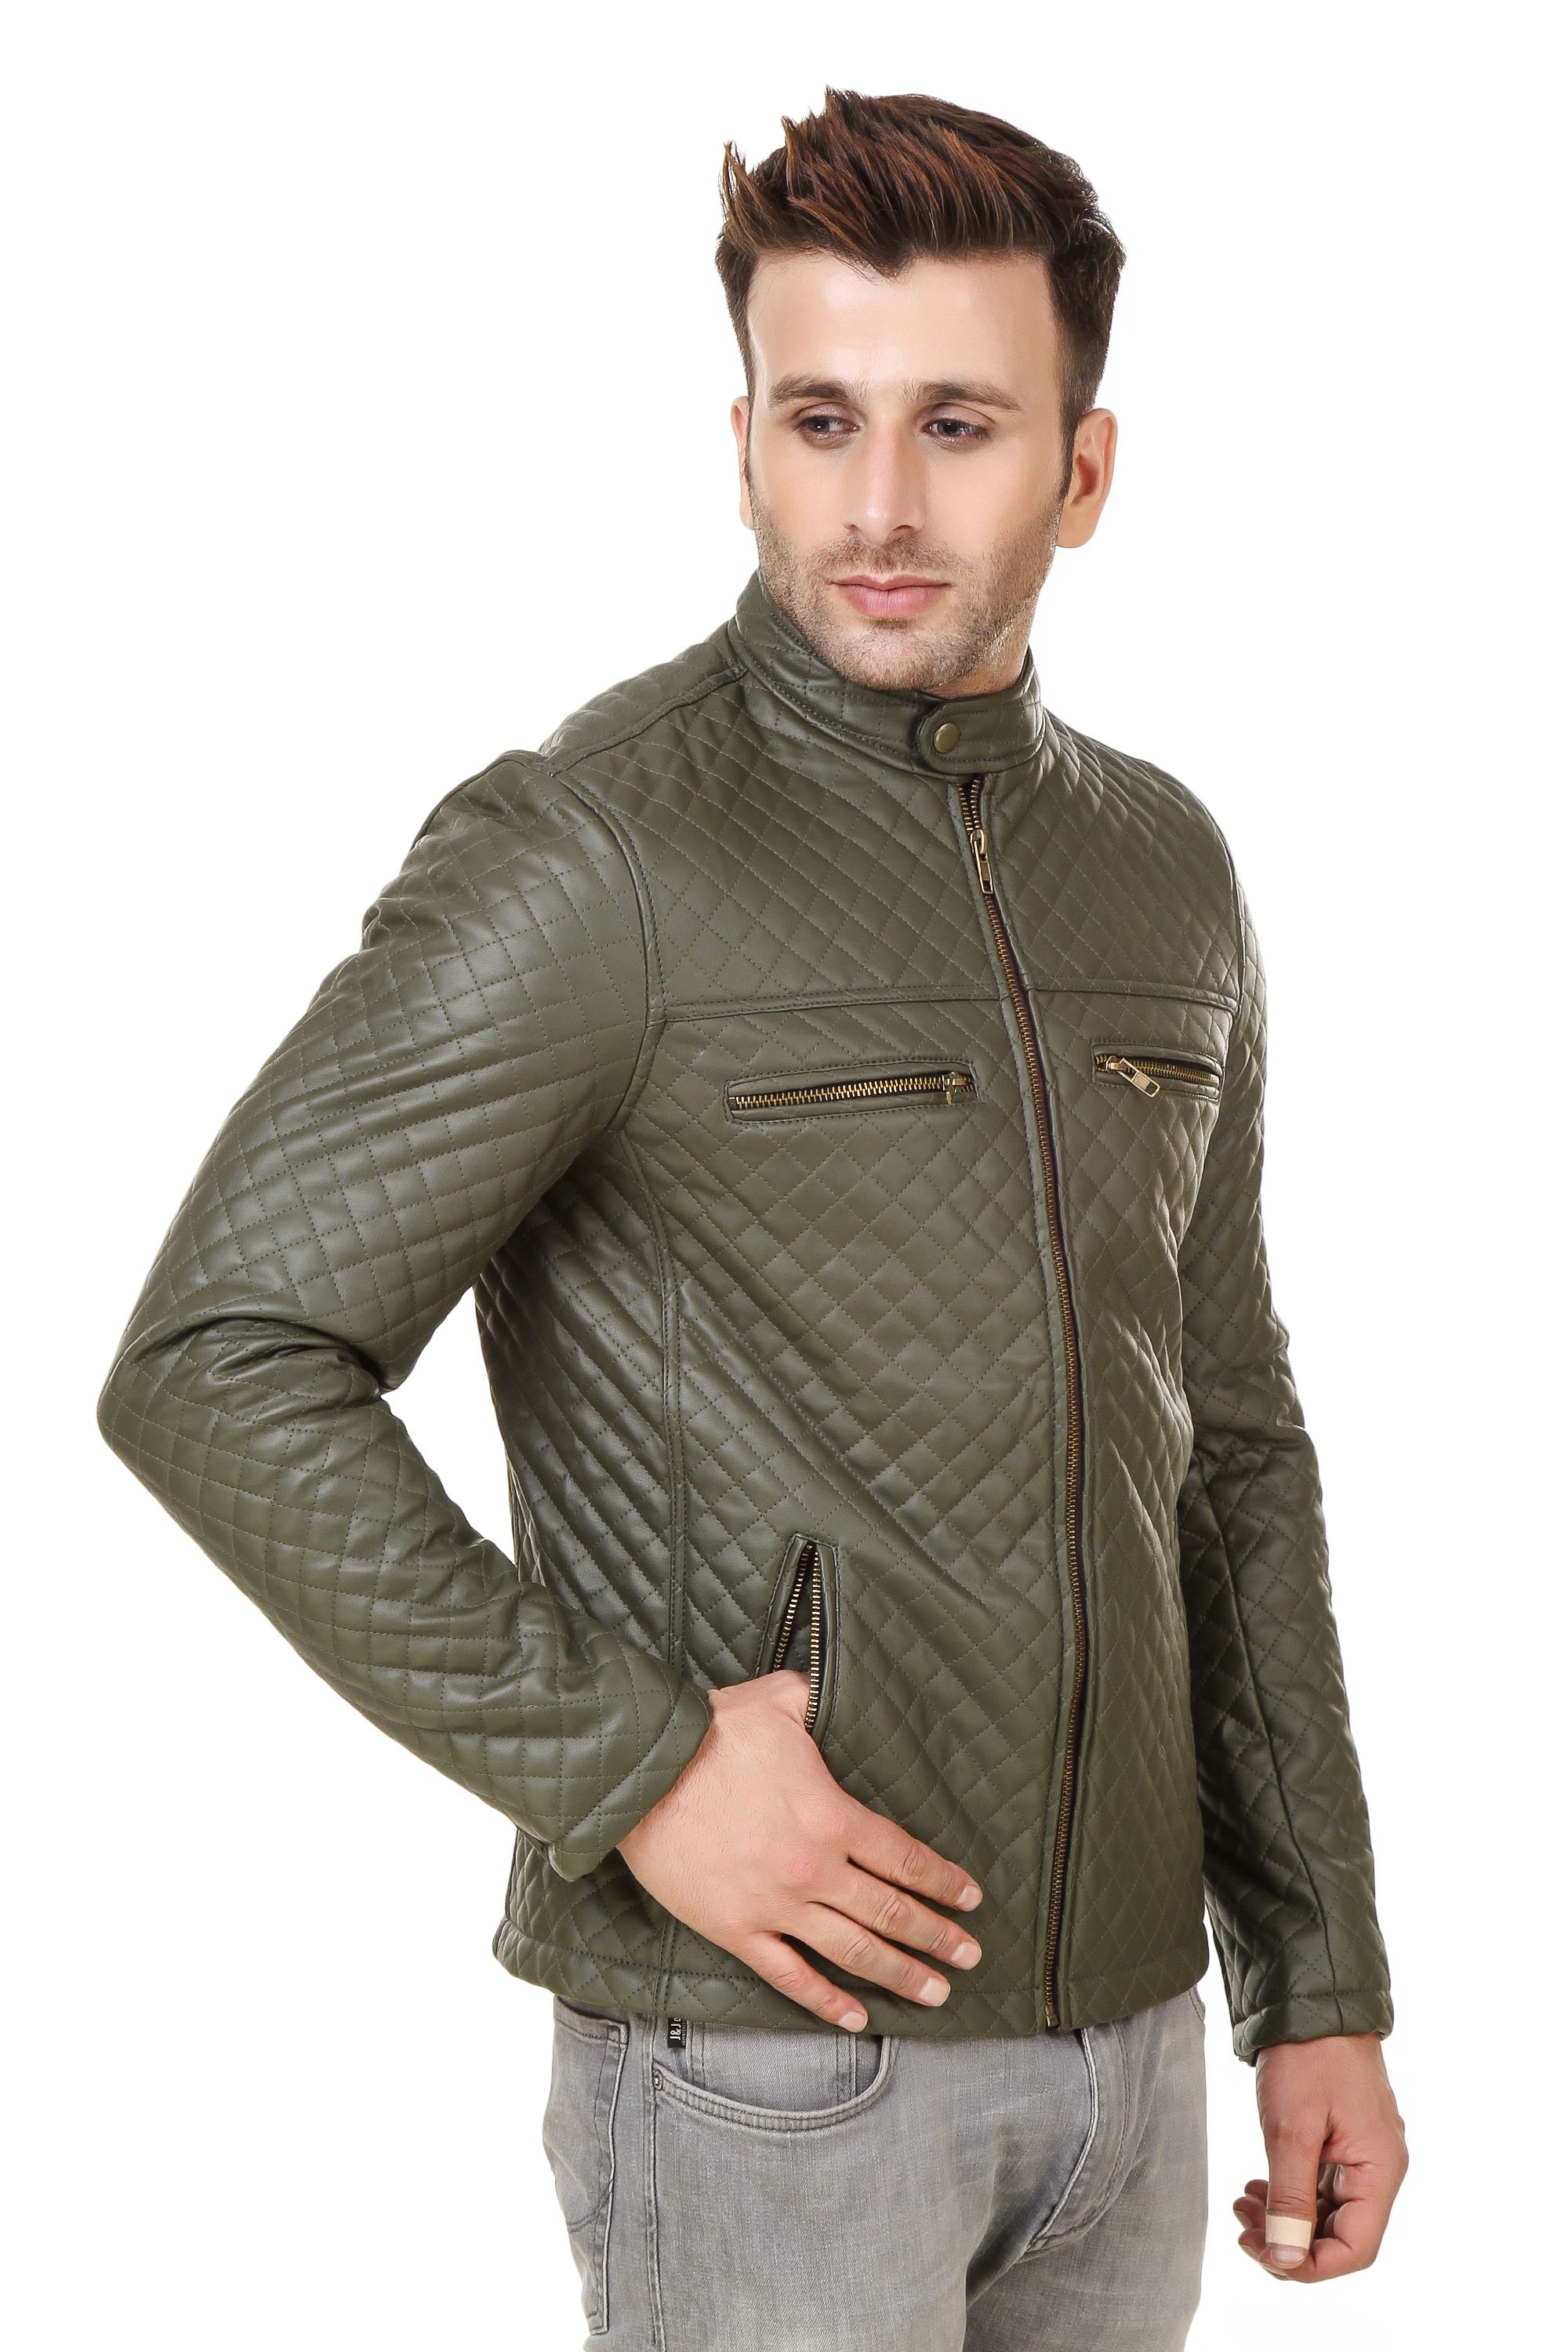 Kimbley Green Quilted & Bomber Jacket - Buy Kimbley Green Quilted ...